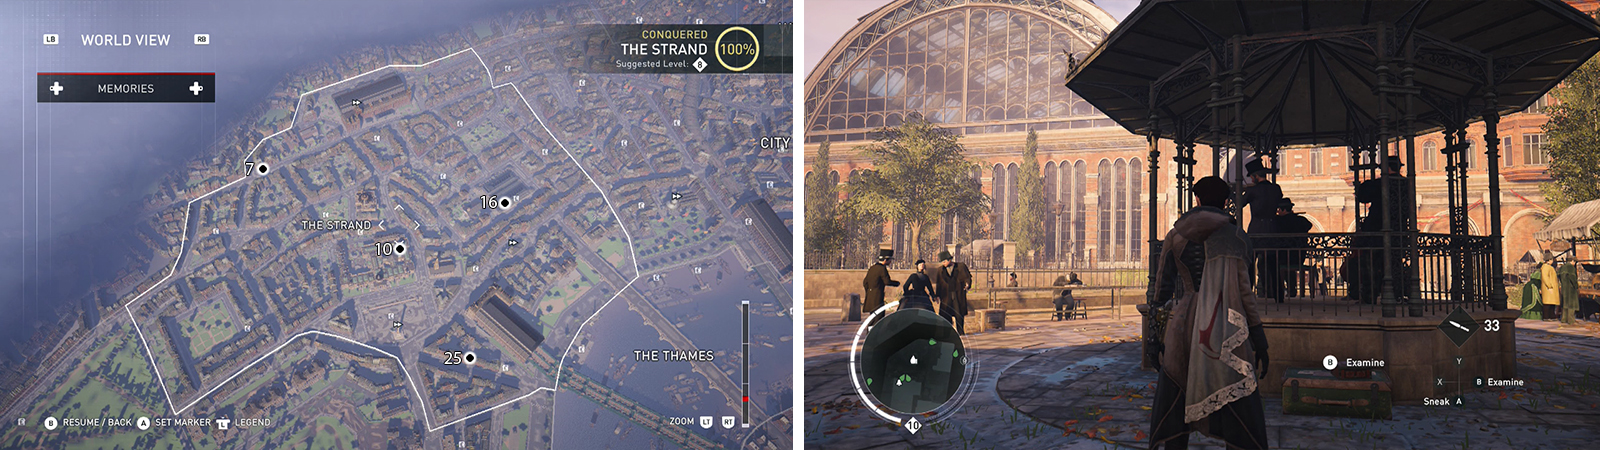 The Secrets of London can be found on the map (left). Location of Secret of London #07 pictured (right).